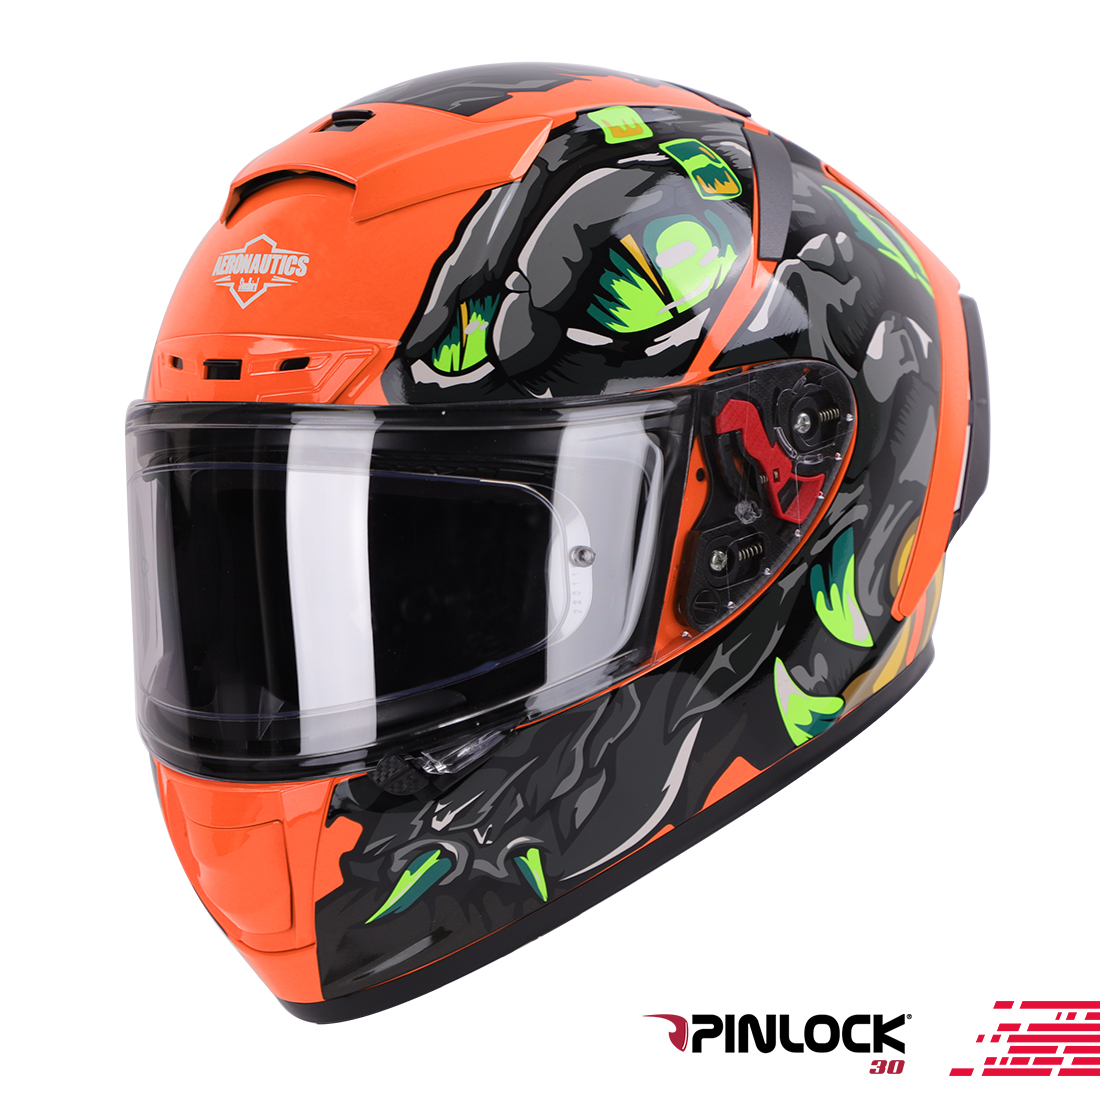 Steelbird SA-5 Monster ISI/DOT Certified Full Face Graphic Helmet With Outer Anti-Fog Clear Visor (Glossy Fluo Orange)